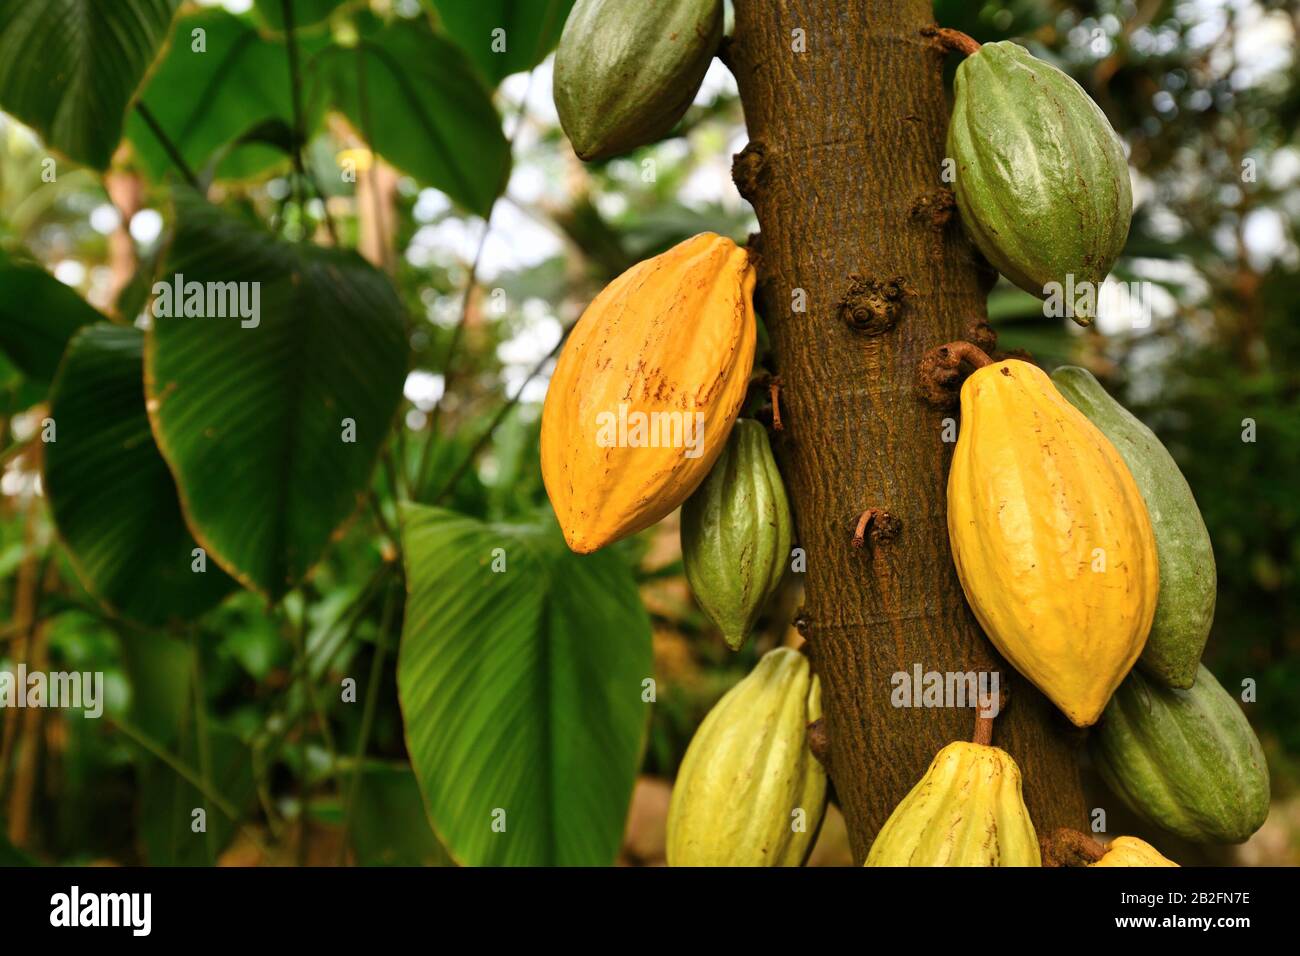 'Theobroma Cacao' cocoa plant tree with huge yellow and green cocoa beans used for production of chocolate Stock Photo